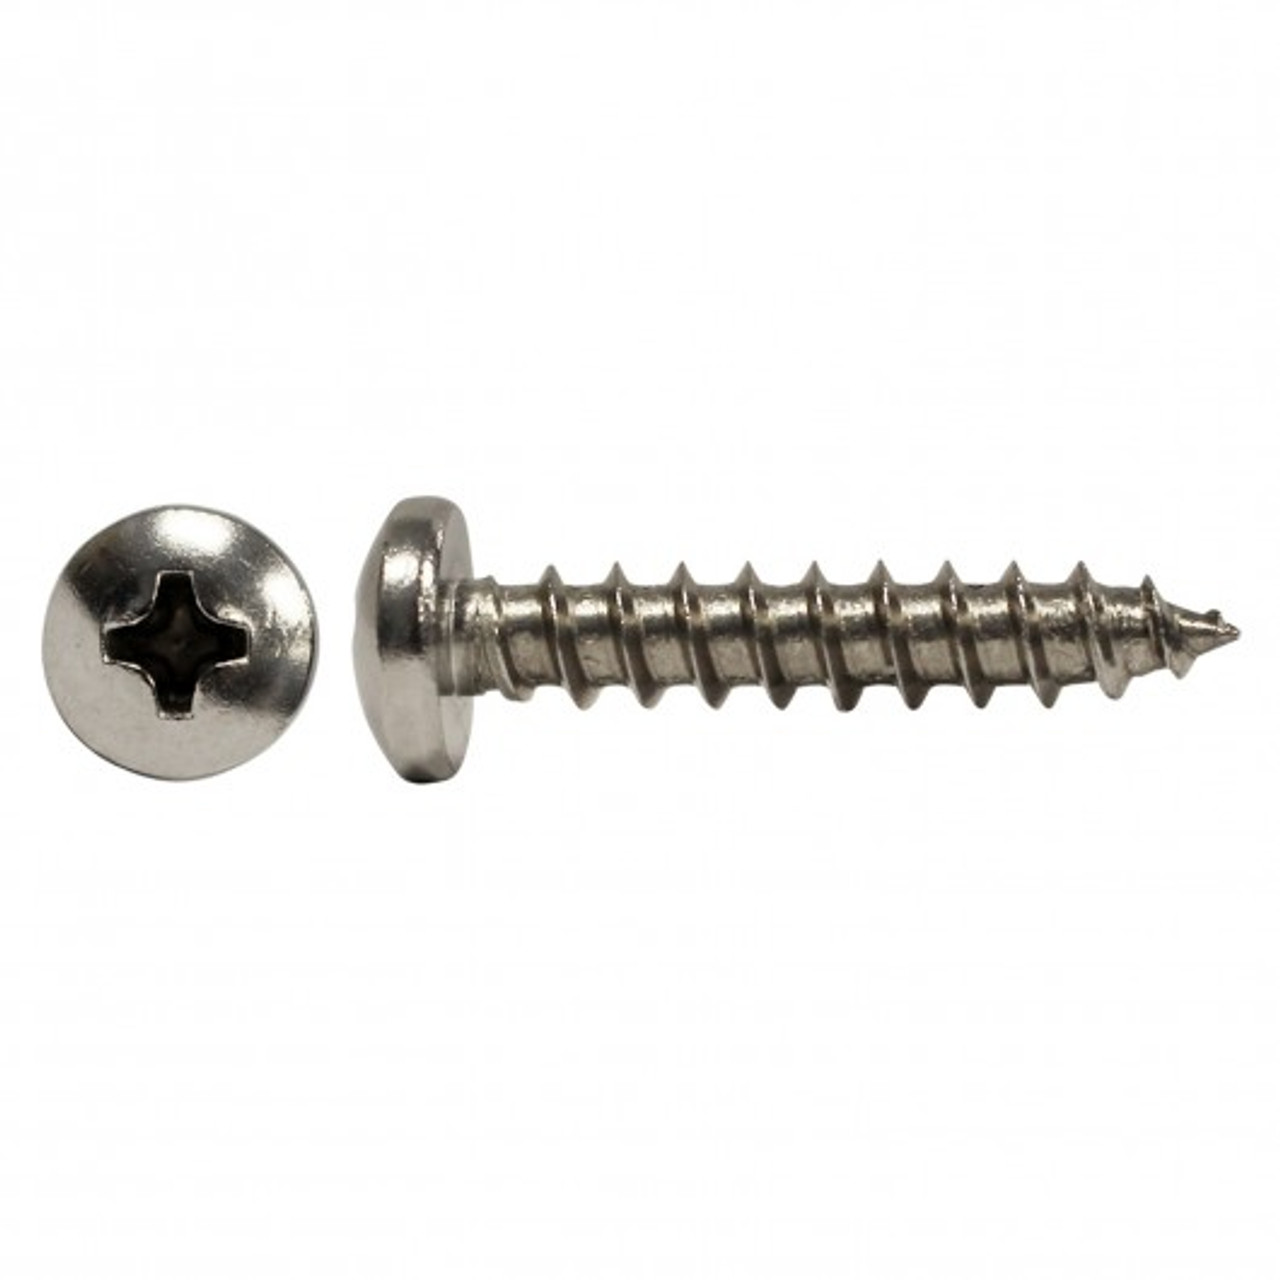 #4 x 1/4" Pan Head Stainless Steel Tapping Screw 100 Pc.   5171-039